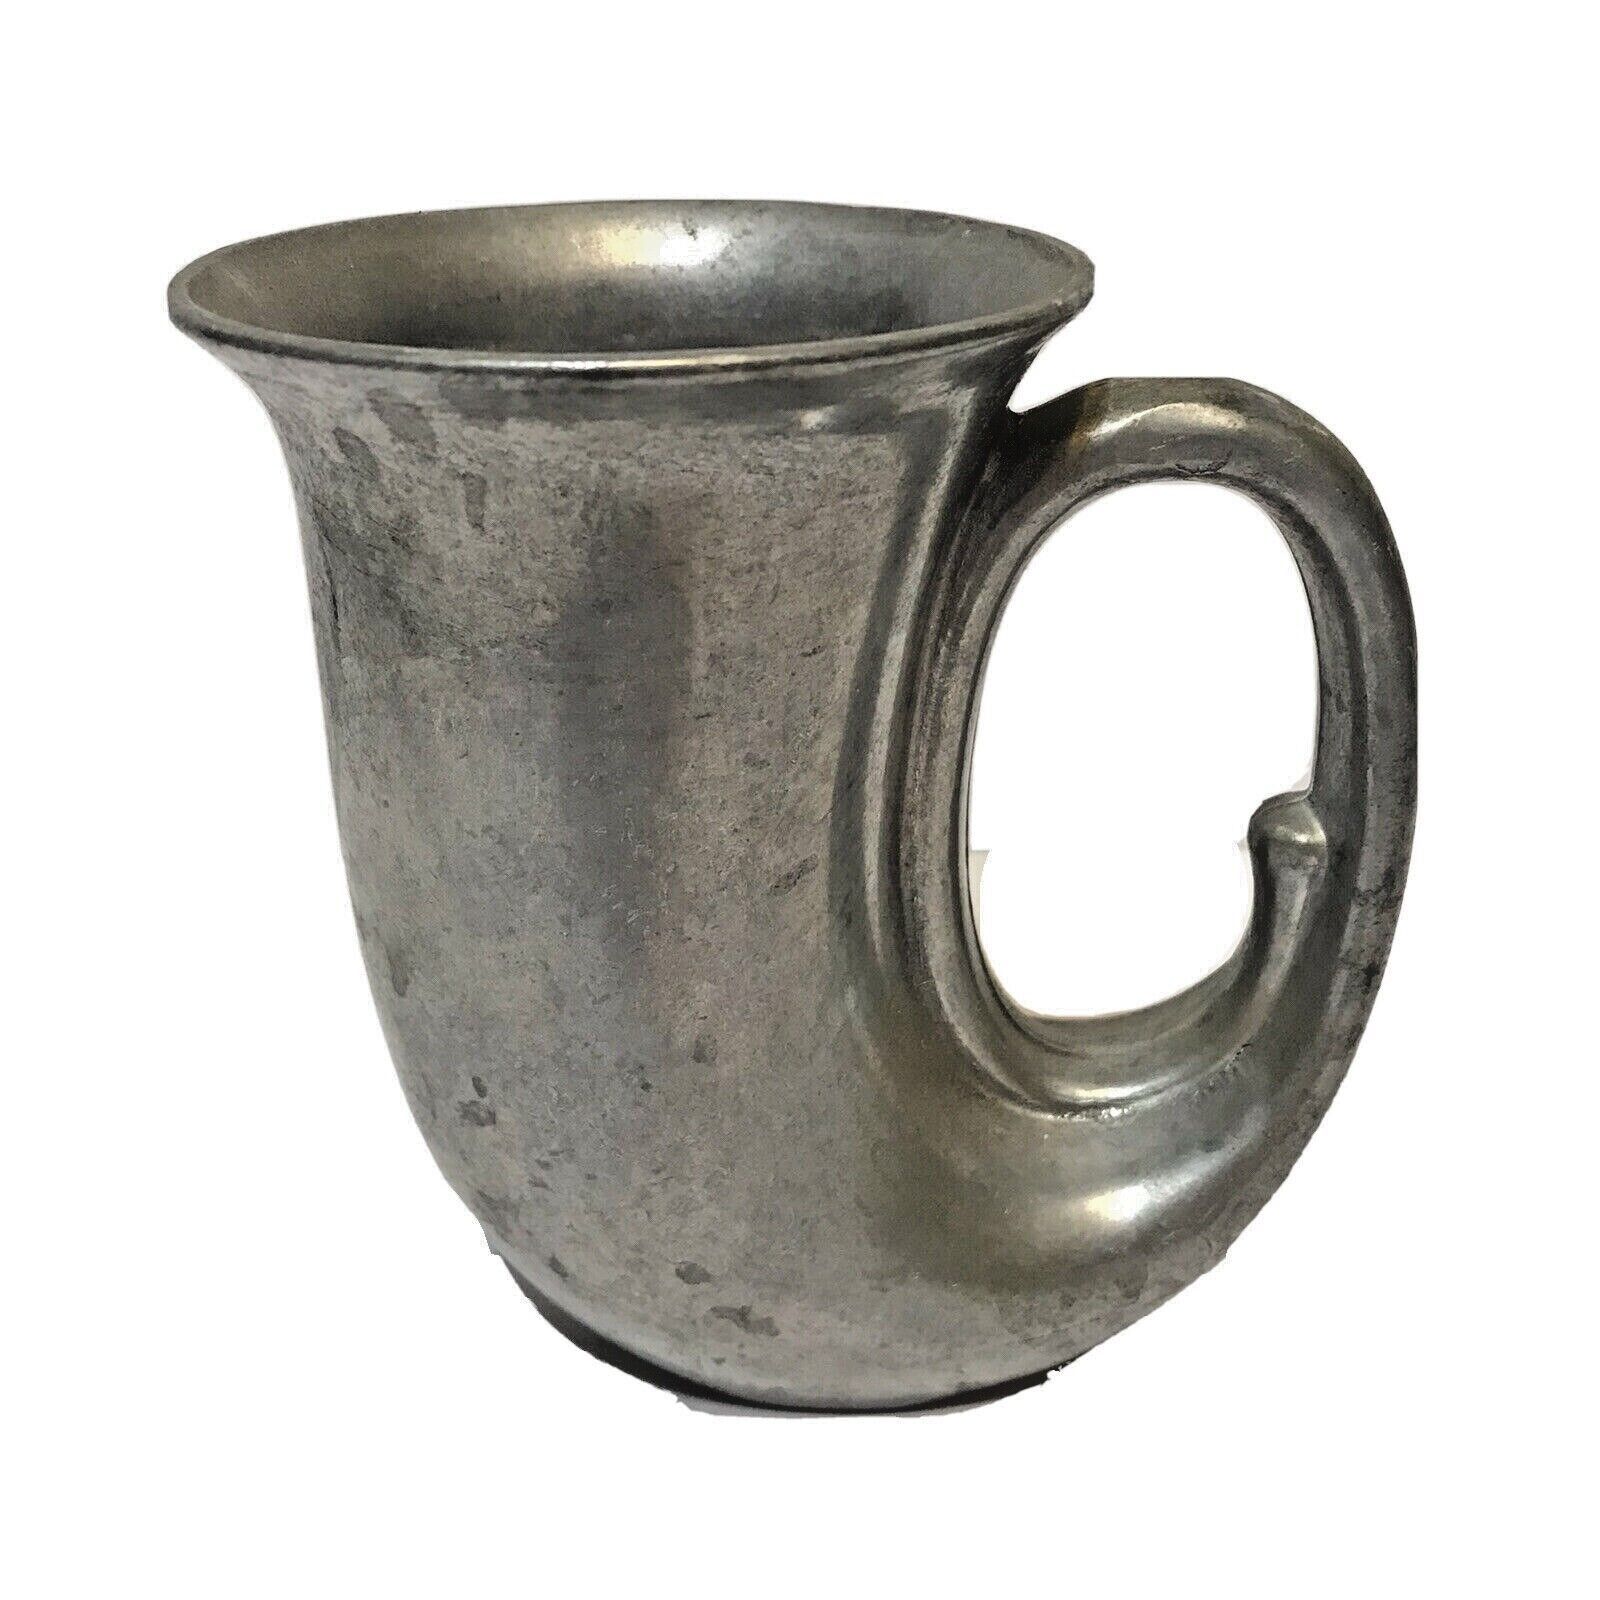 Vintage Pewter French Horn Shaped Mug Duratale By Leonard Made in Italy - $13.59